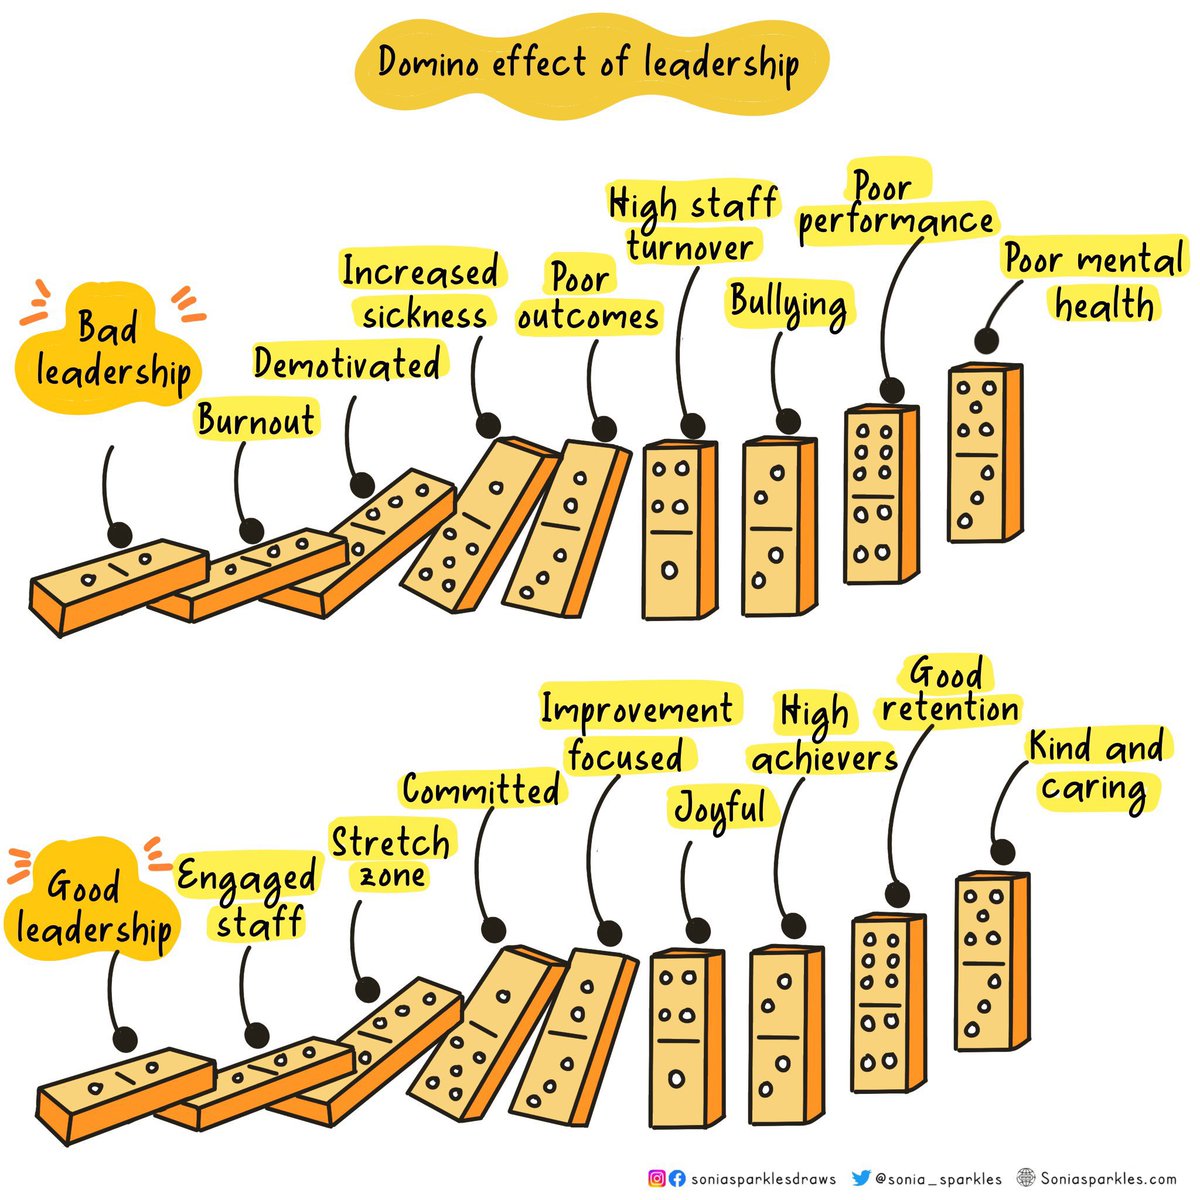 The way you behave Your leadership Your role modelling Your approach All have a domino effect on others, the culture & environment #leadership